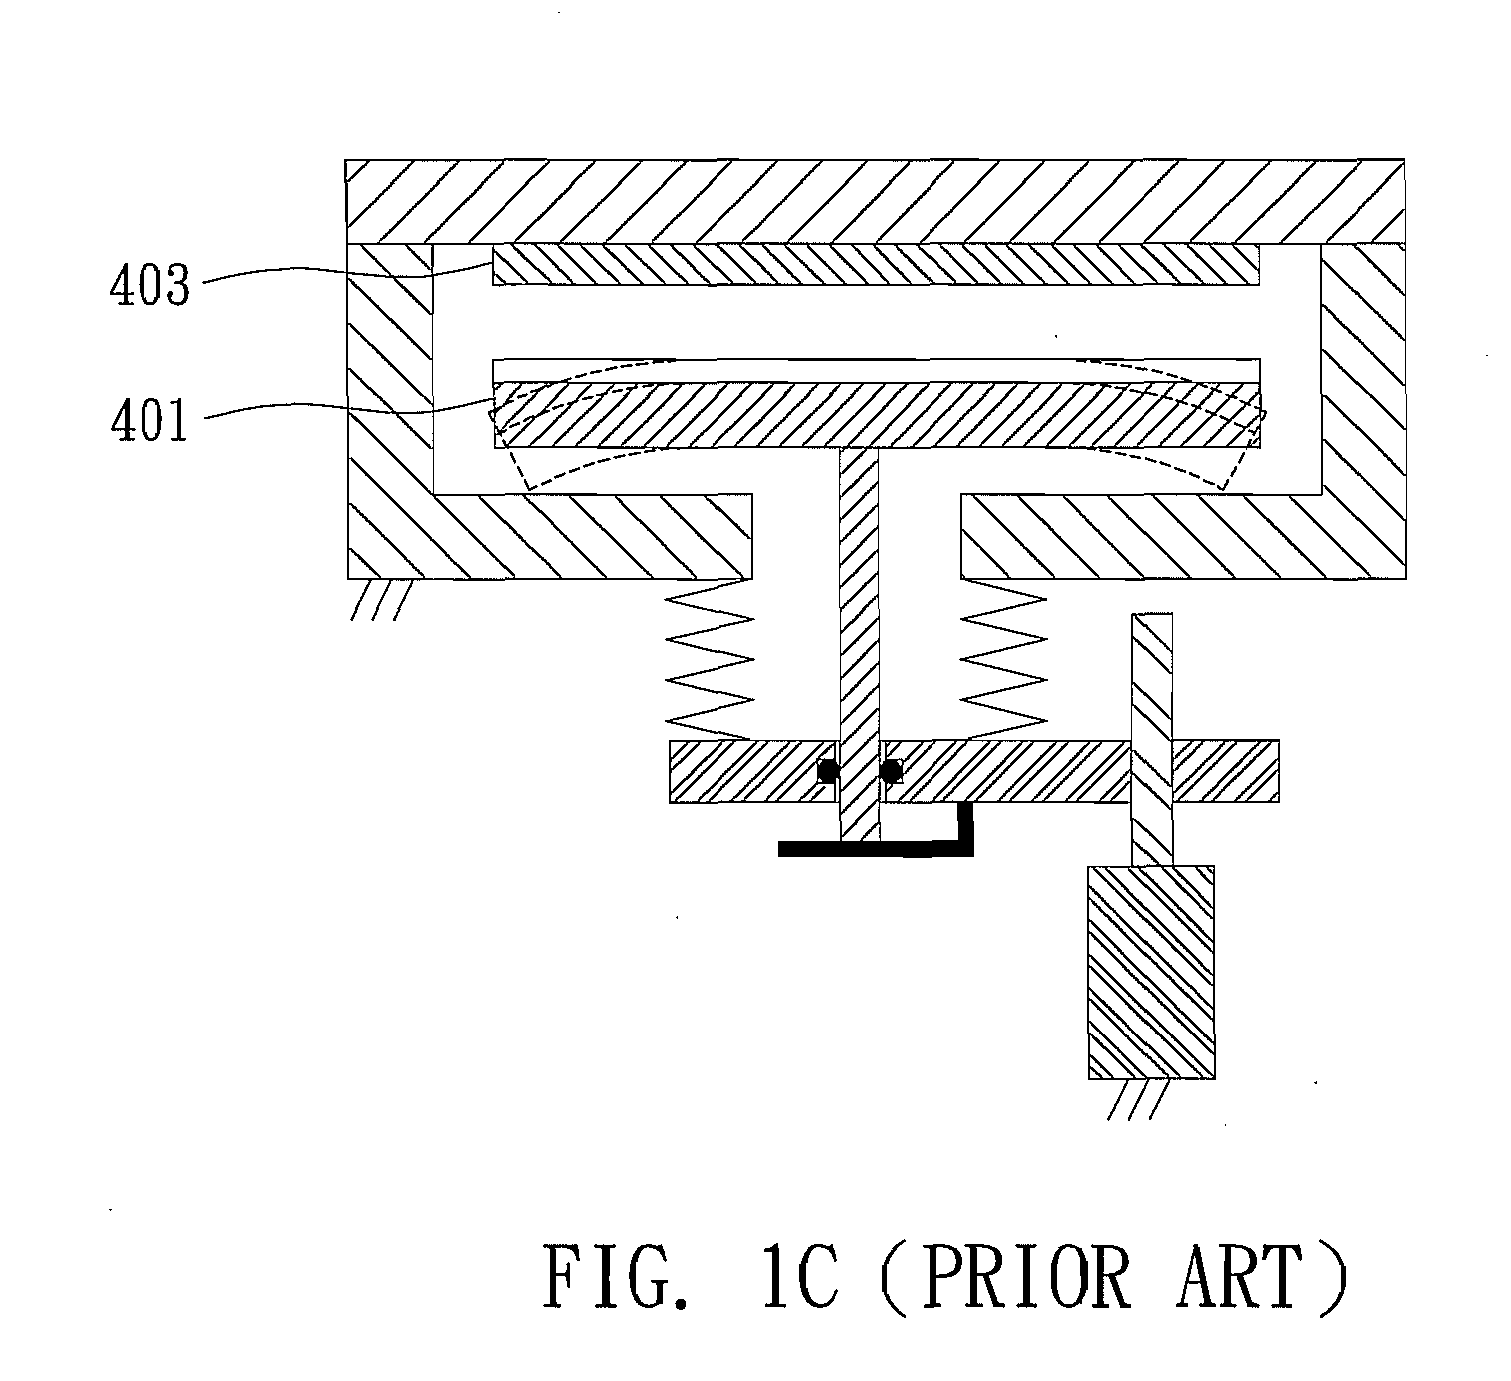 Susceptor positioning and supporting device of vacuum apparatus